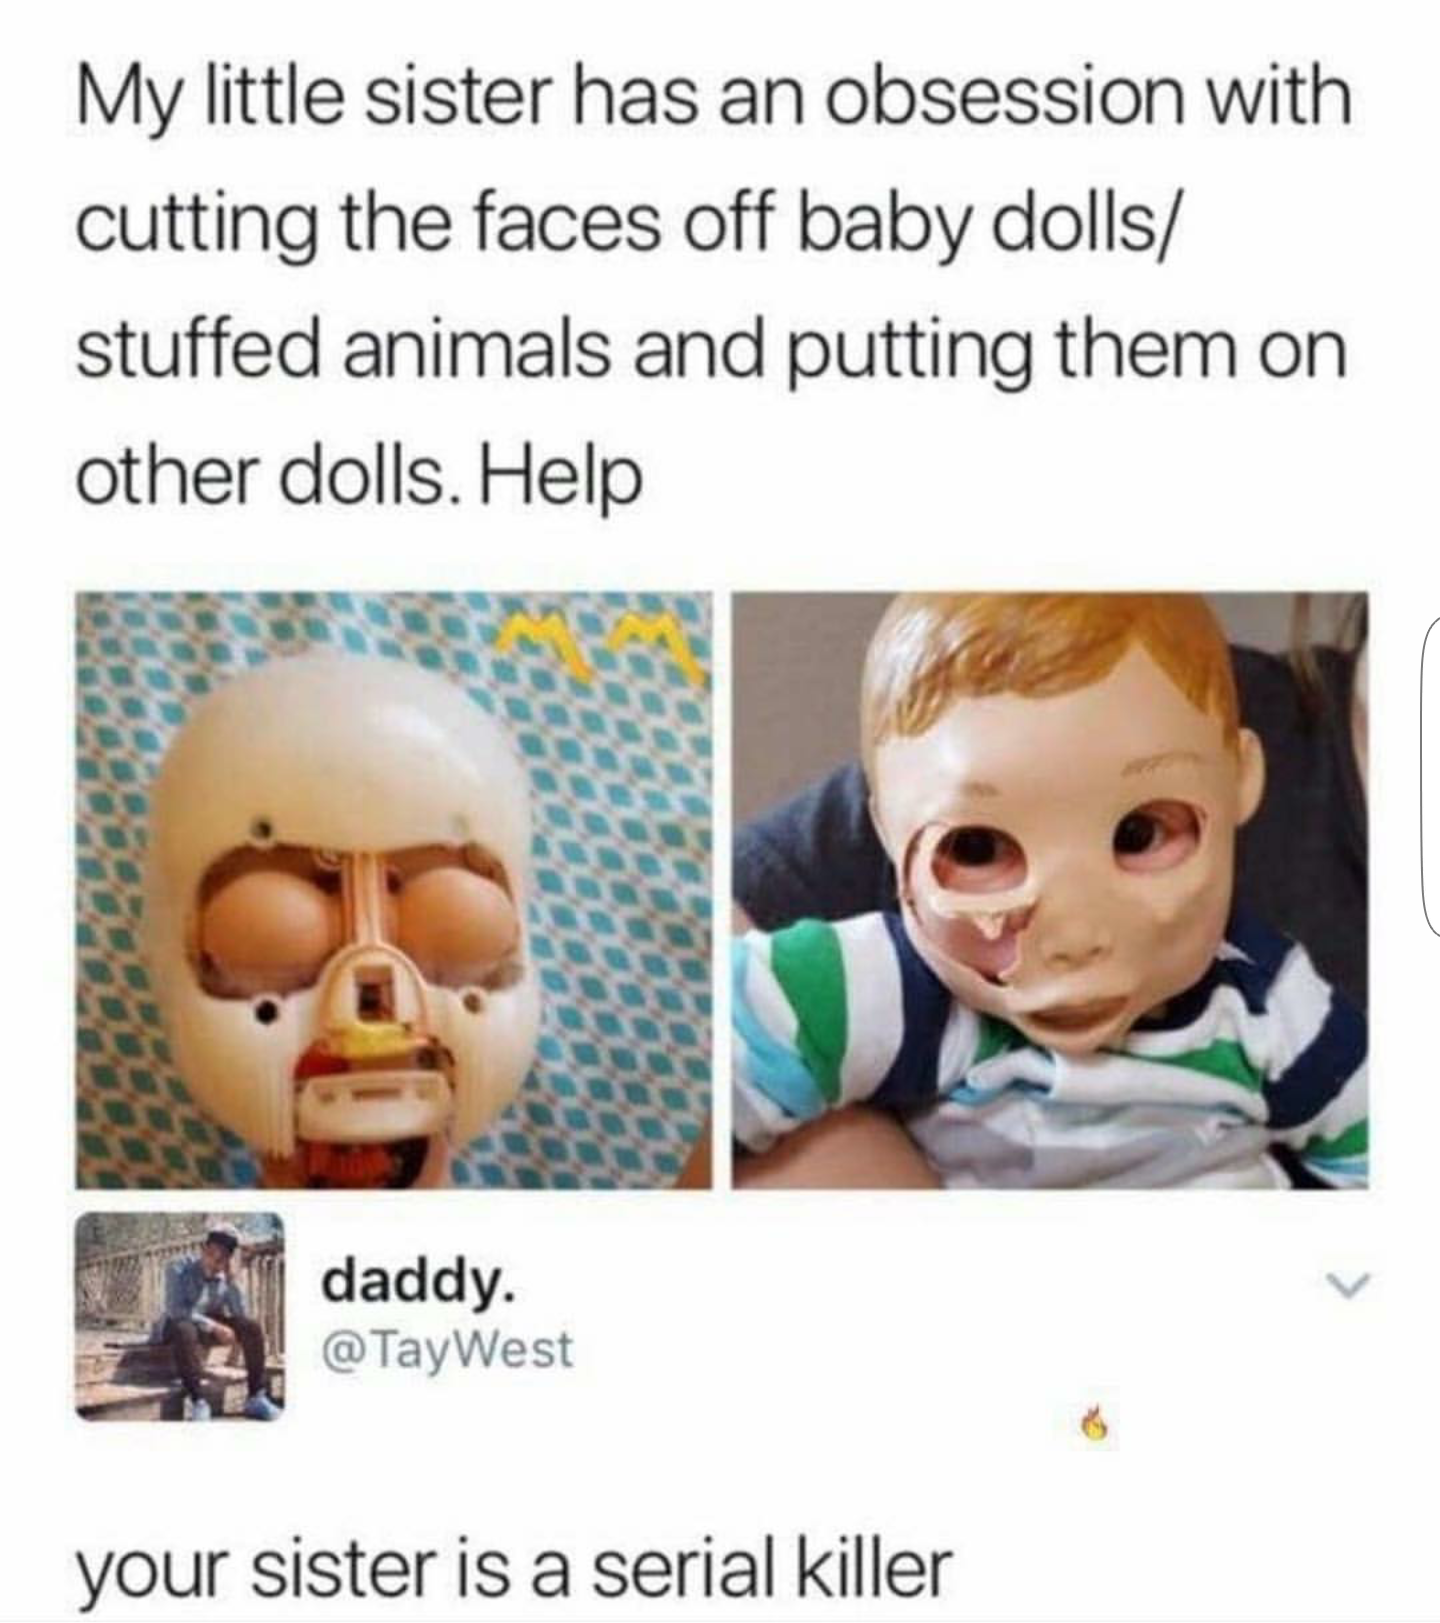 memes - thanks i hate it subreddit - My little sister has an obsession with cutting the faces off baby dolls stuffed animals and putting them on other dolls. Help daddy. @ TayWest your sister is a serial killer